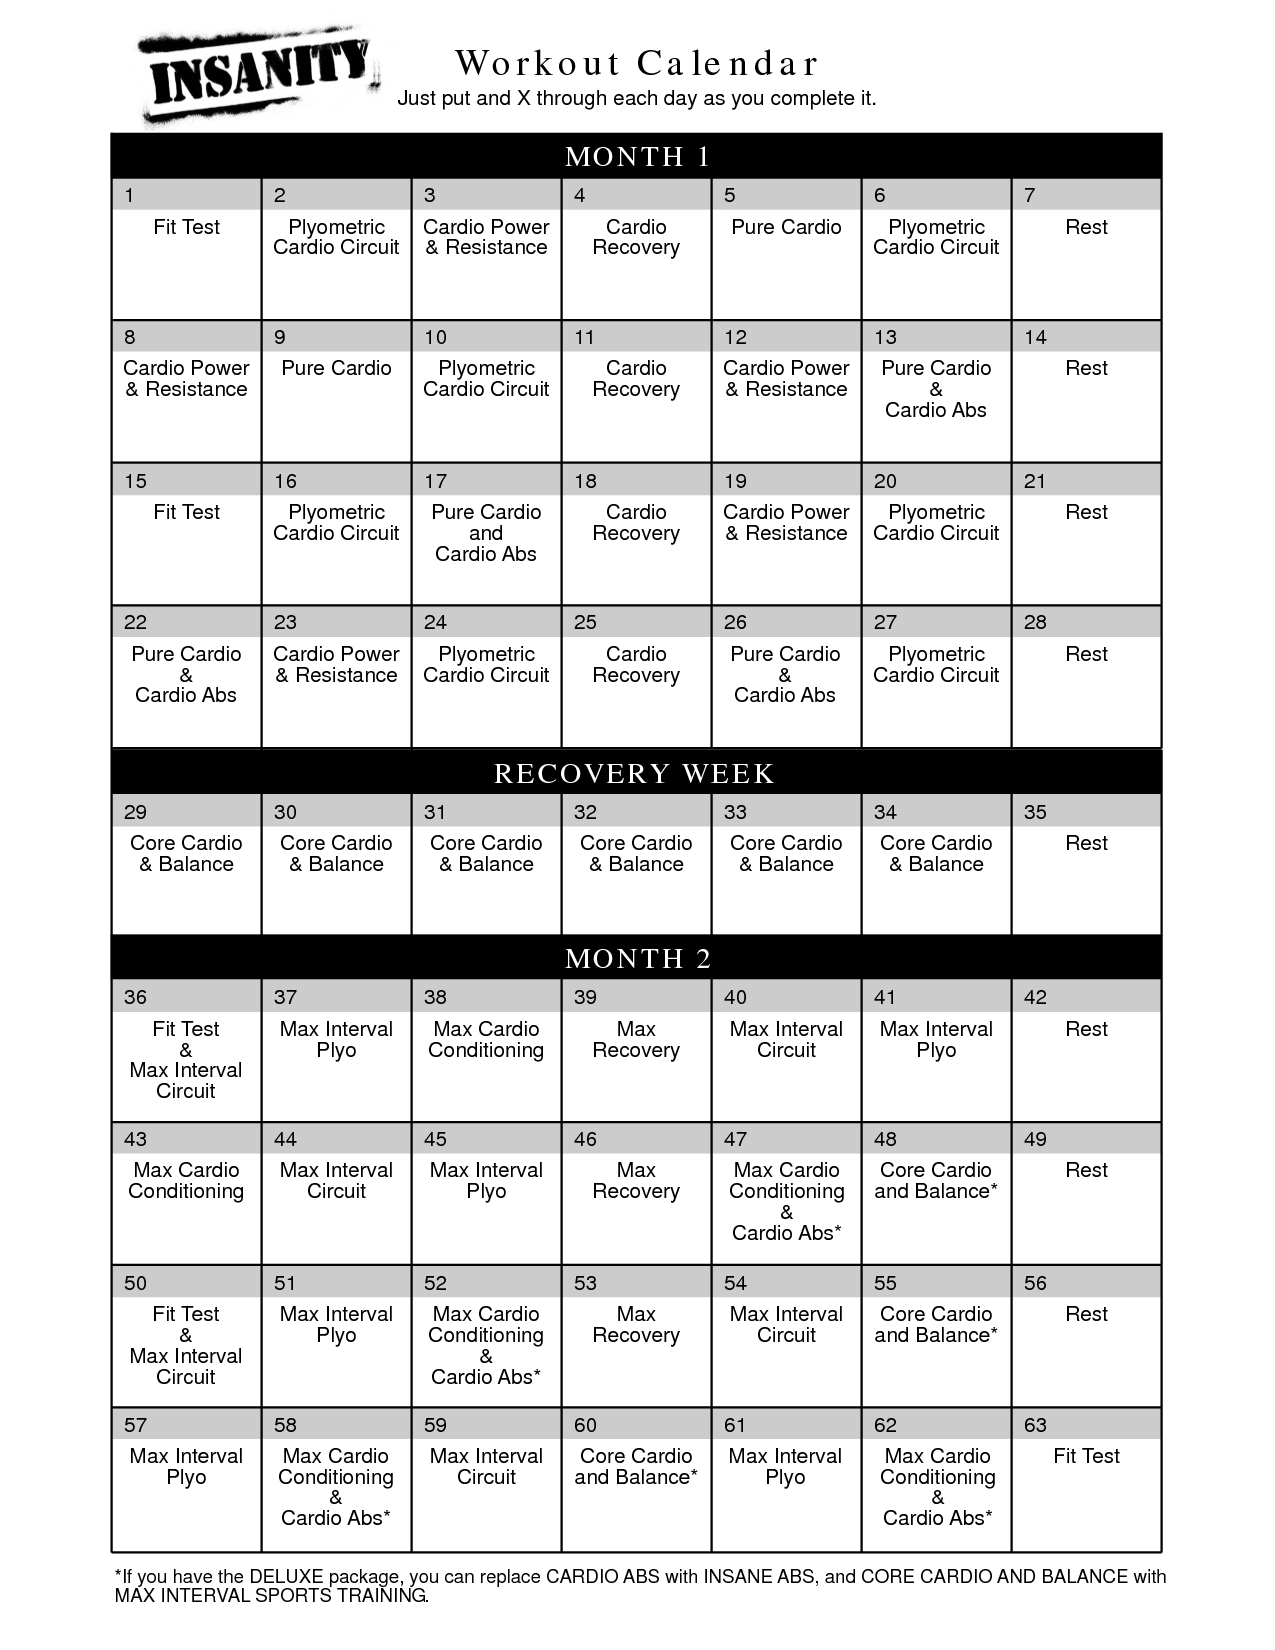 Workout Schedule | Insanity Workout Log